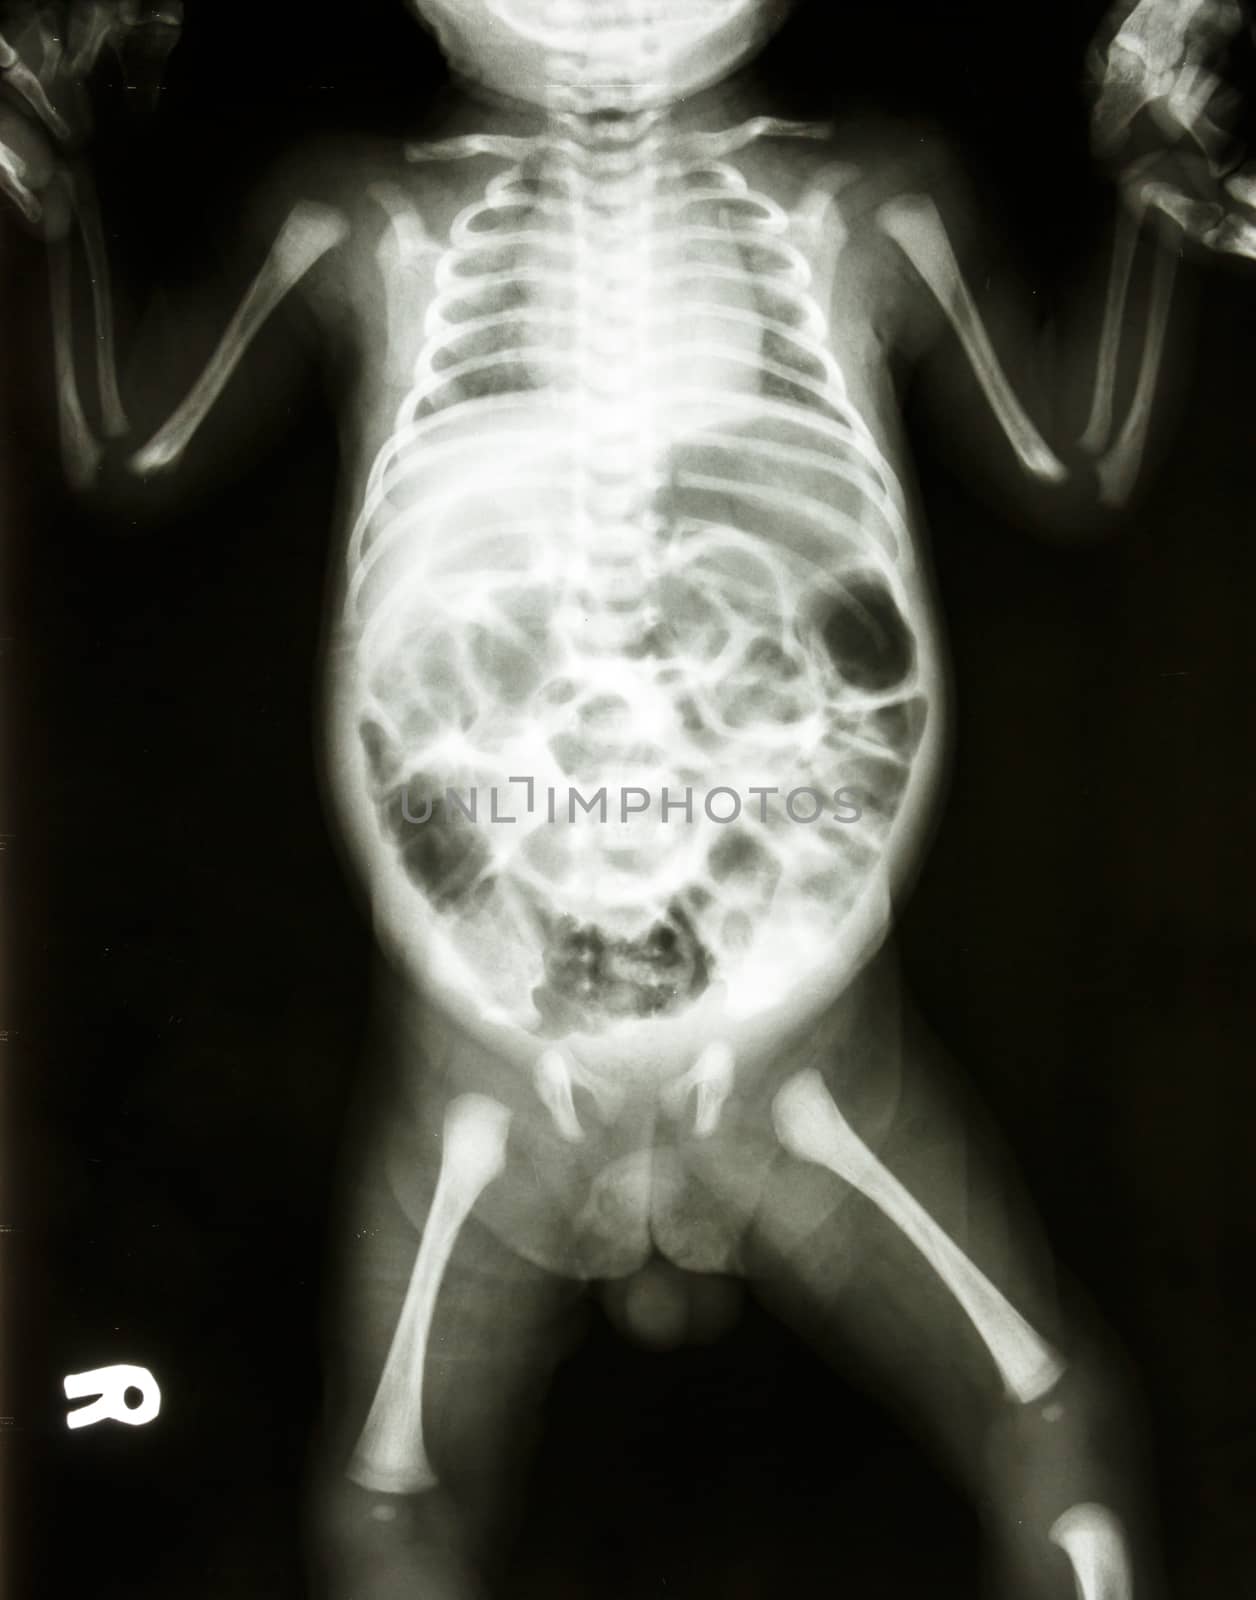 film X-ray show normal skeleton of infant